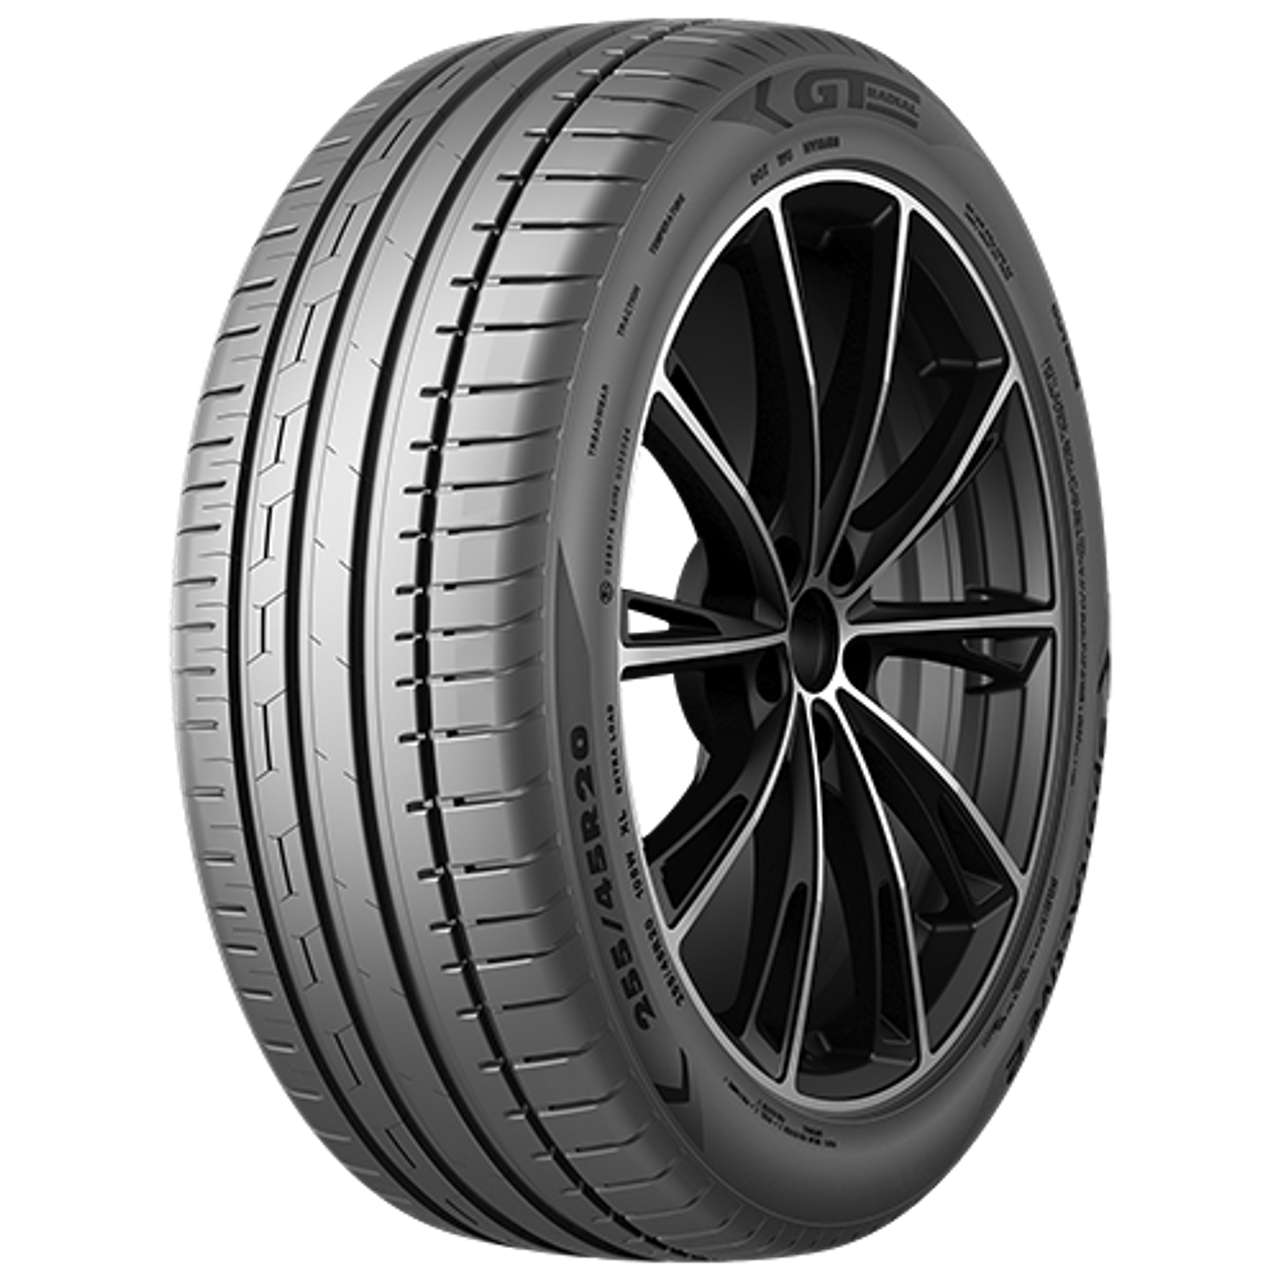 GT-RADIAL SPORTACTIVE 2 235/45R18 98W BSW